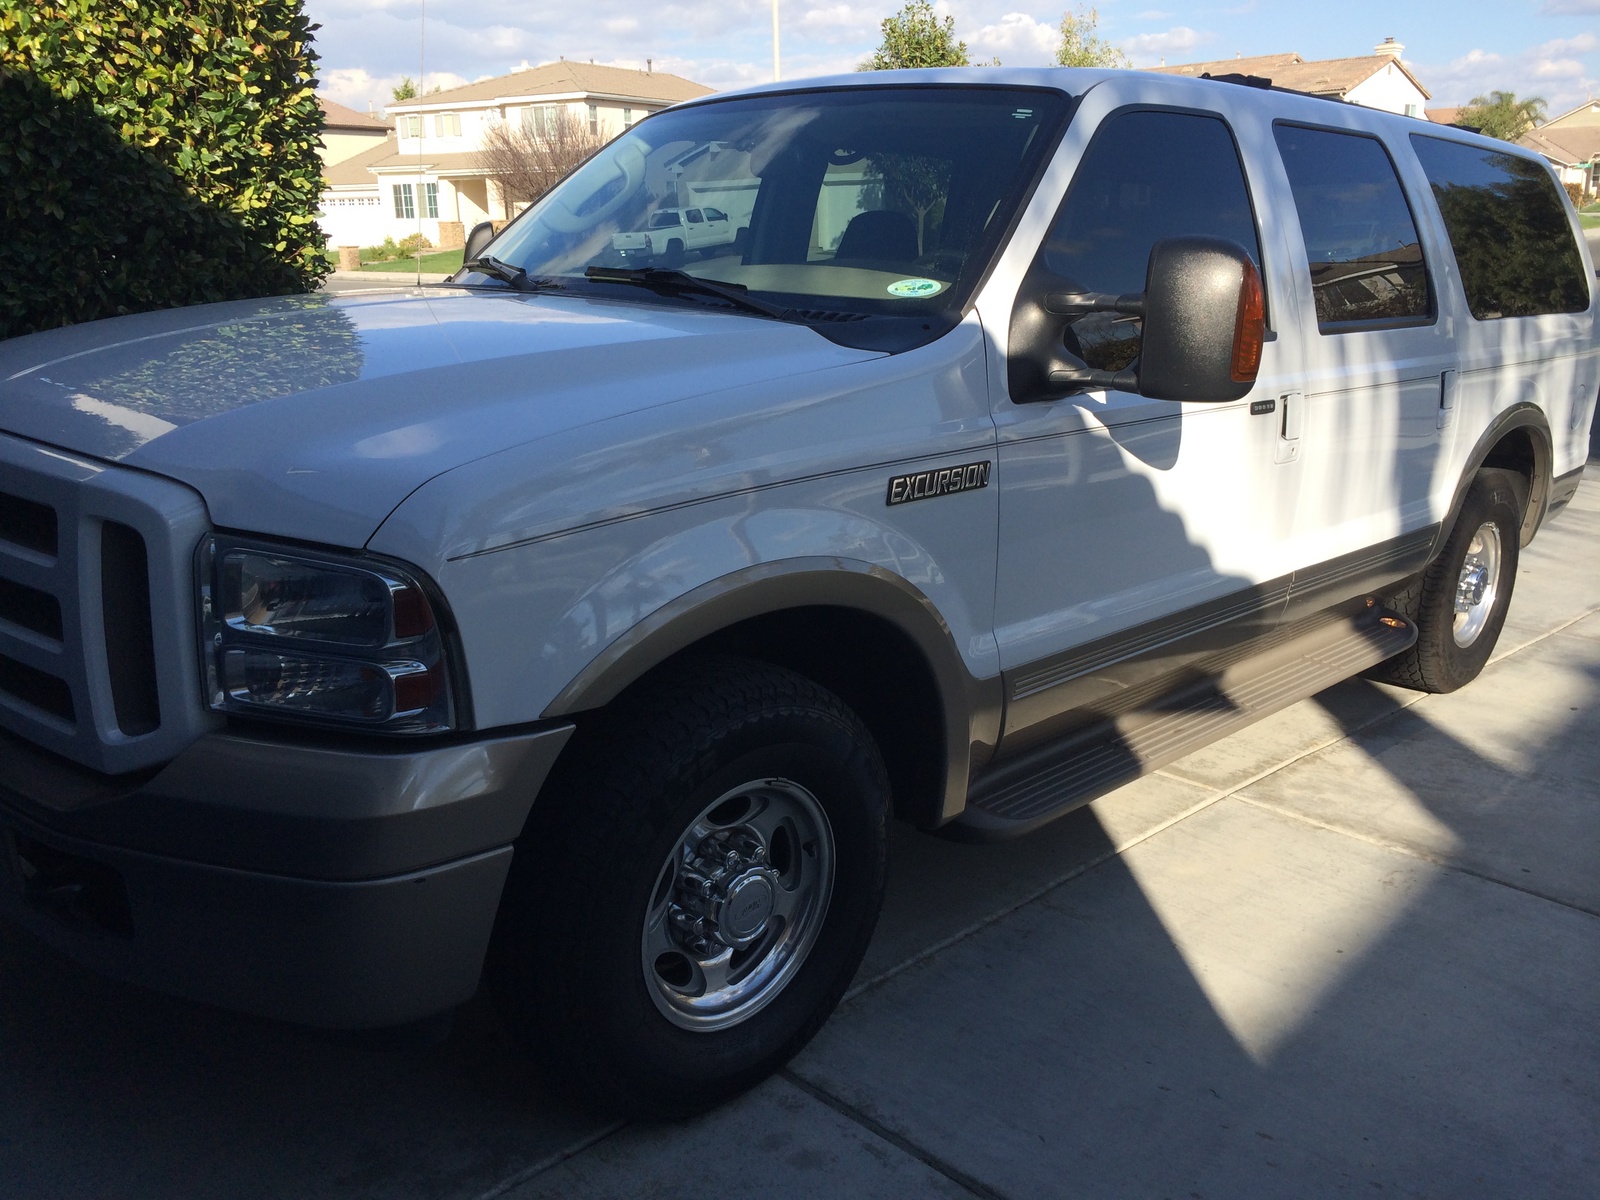 2004 Ford excursion limited reviews #5